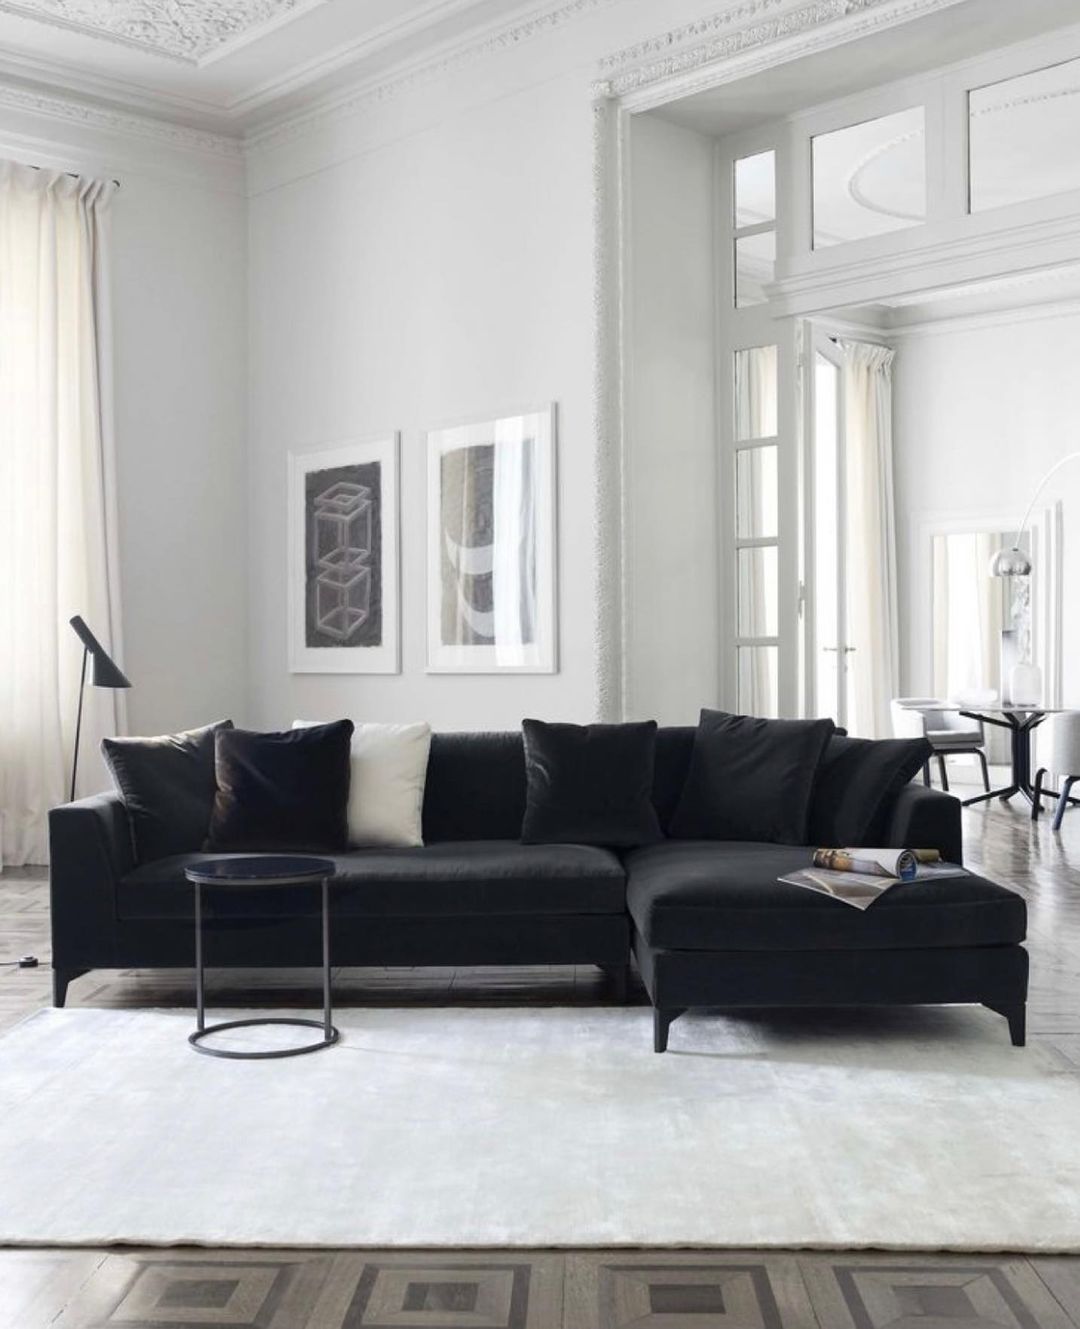 Black Couch in a Classic High-Ceiling Room